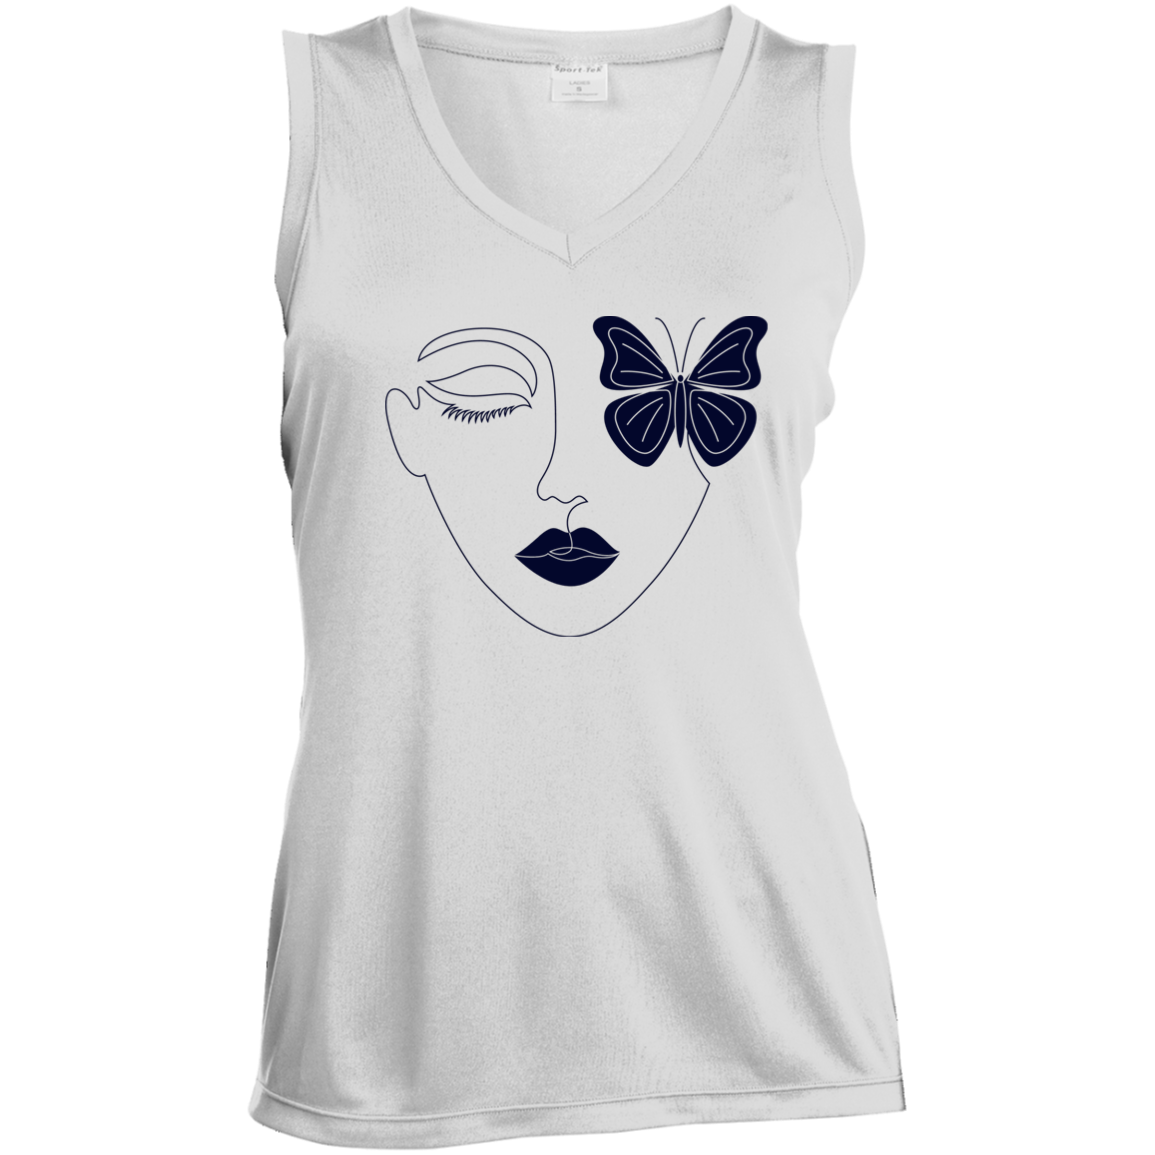 Butterfly Lady, Ladies' Sleeveless V-Neck Performance Tee